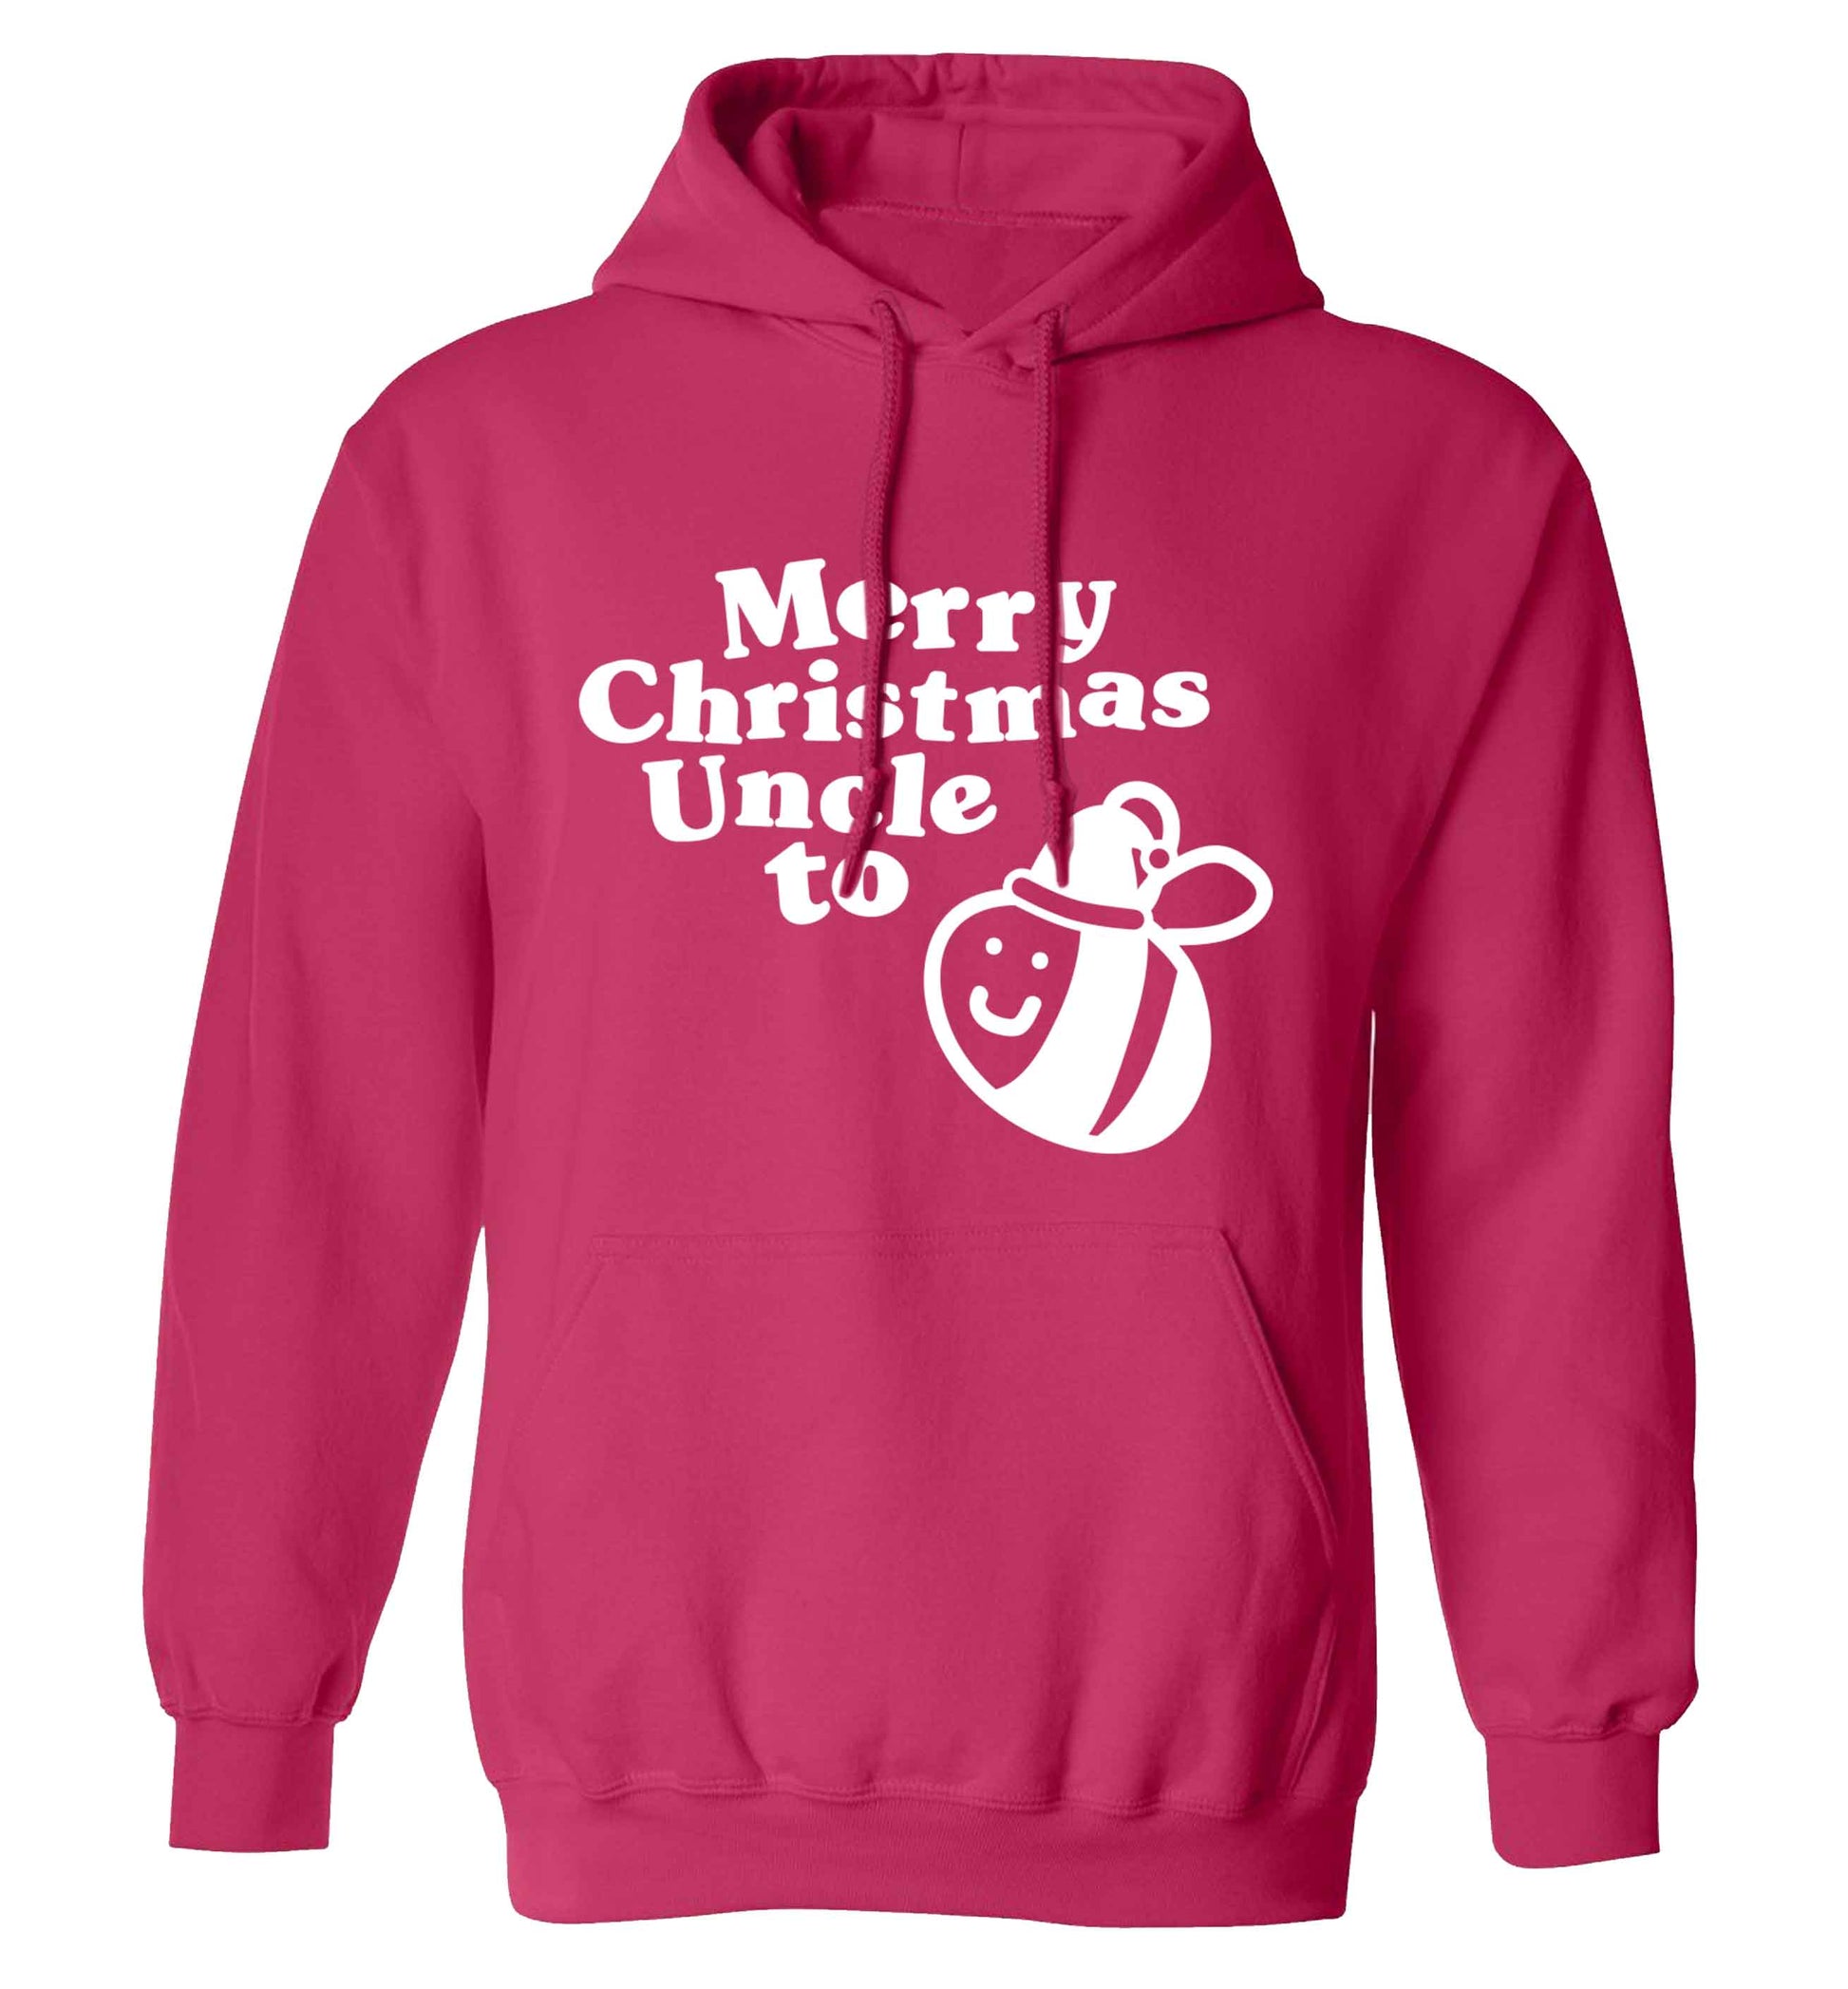 Merry Christmas uncle to be adults unisex pink hoodie 2XL